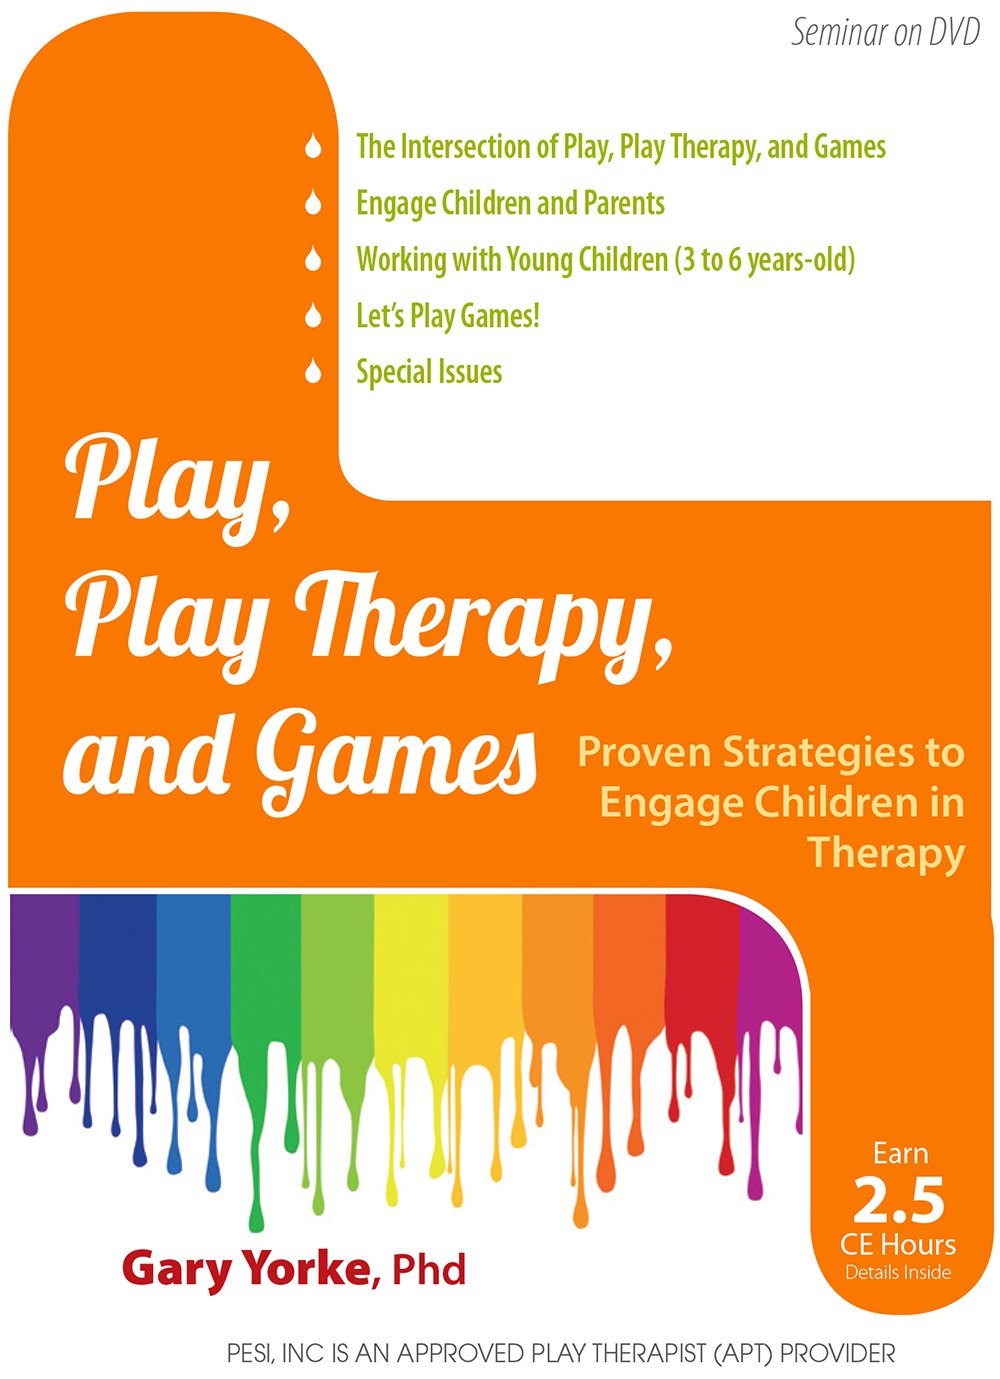 /images/uploaded/1019/Gary G. F. Yorke - Play, Play Therapy, and Games, Engage Children in Therapy.jpg